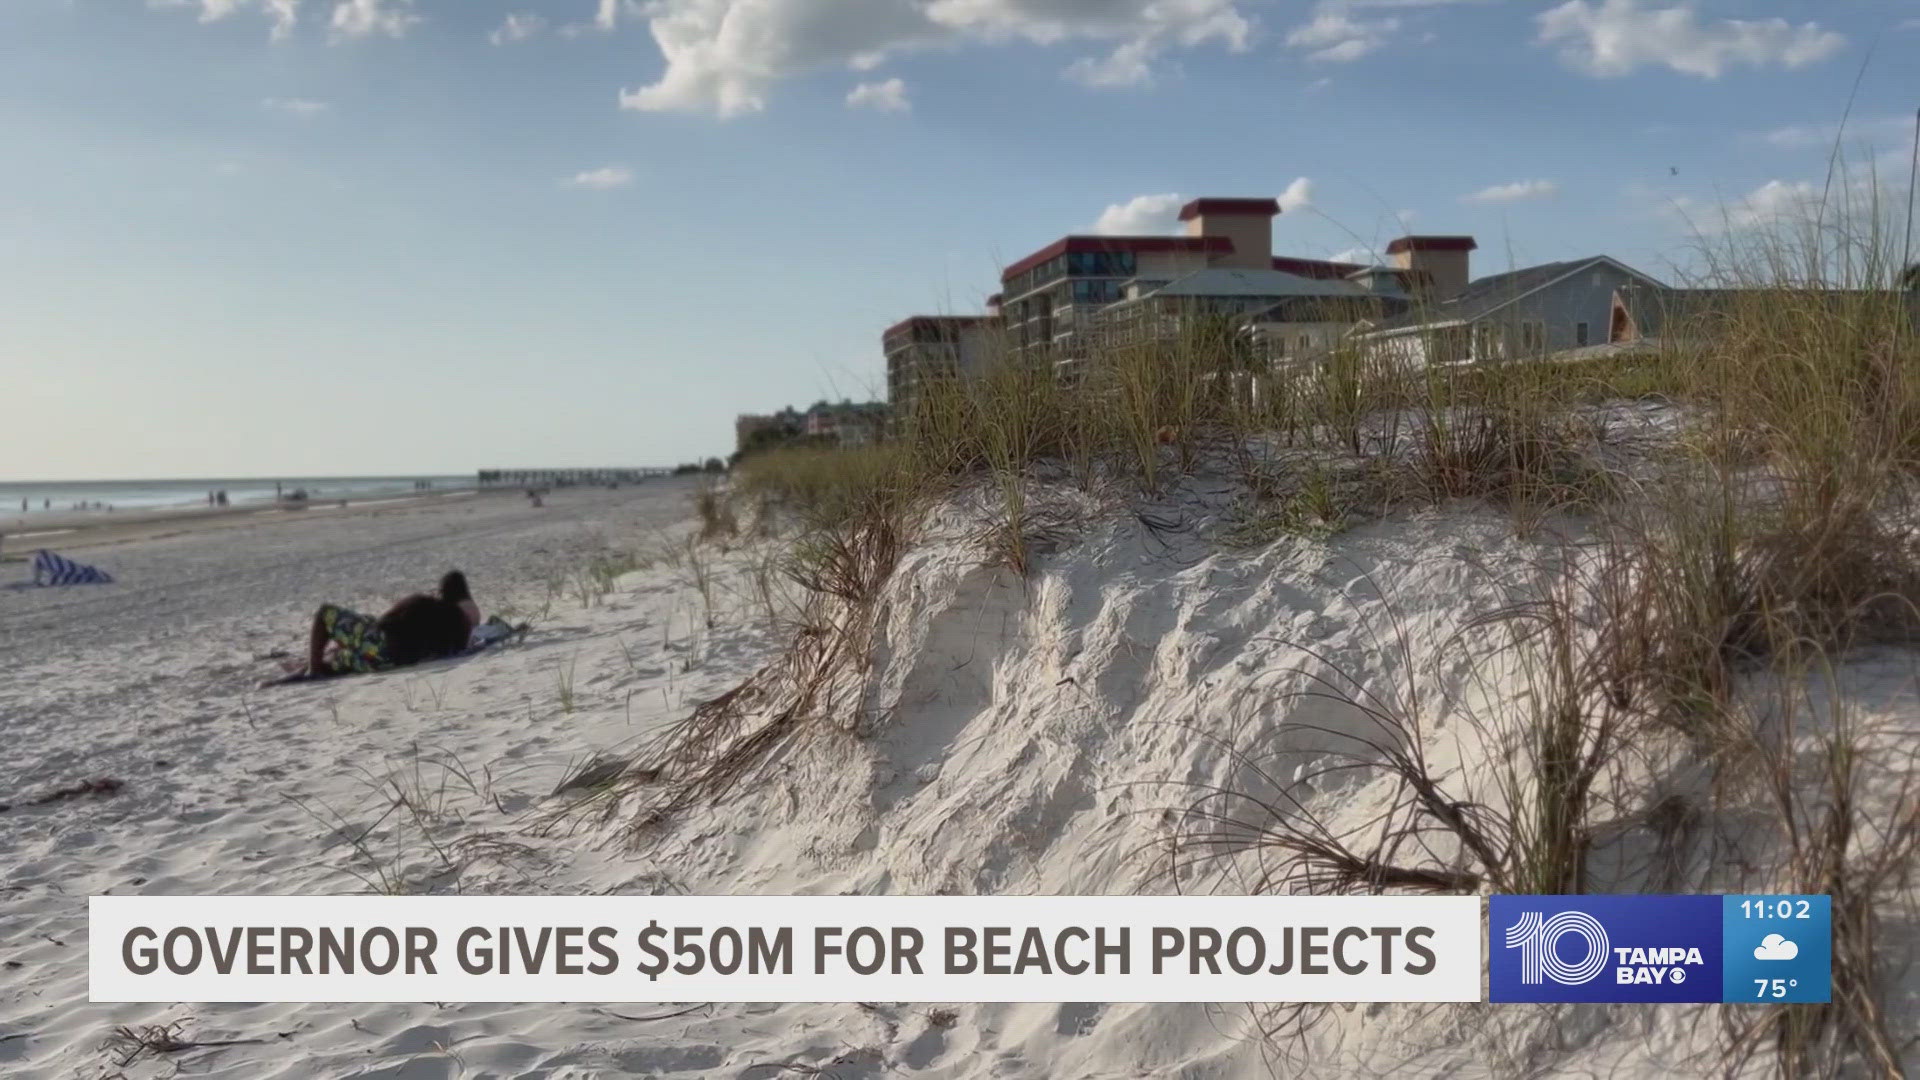 One Pinellas County beach may not benefit from the new funds coming to beach nourishment projects.